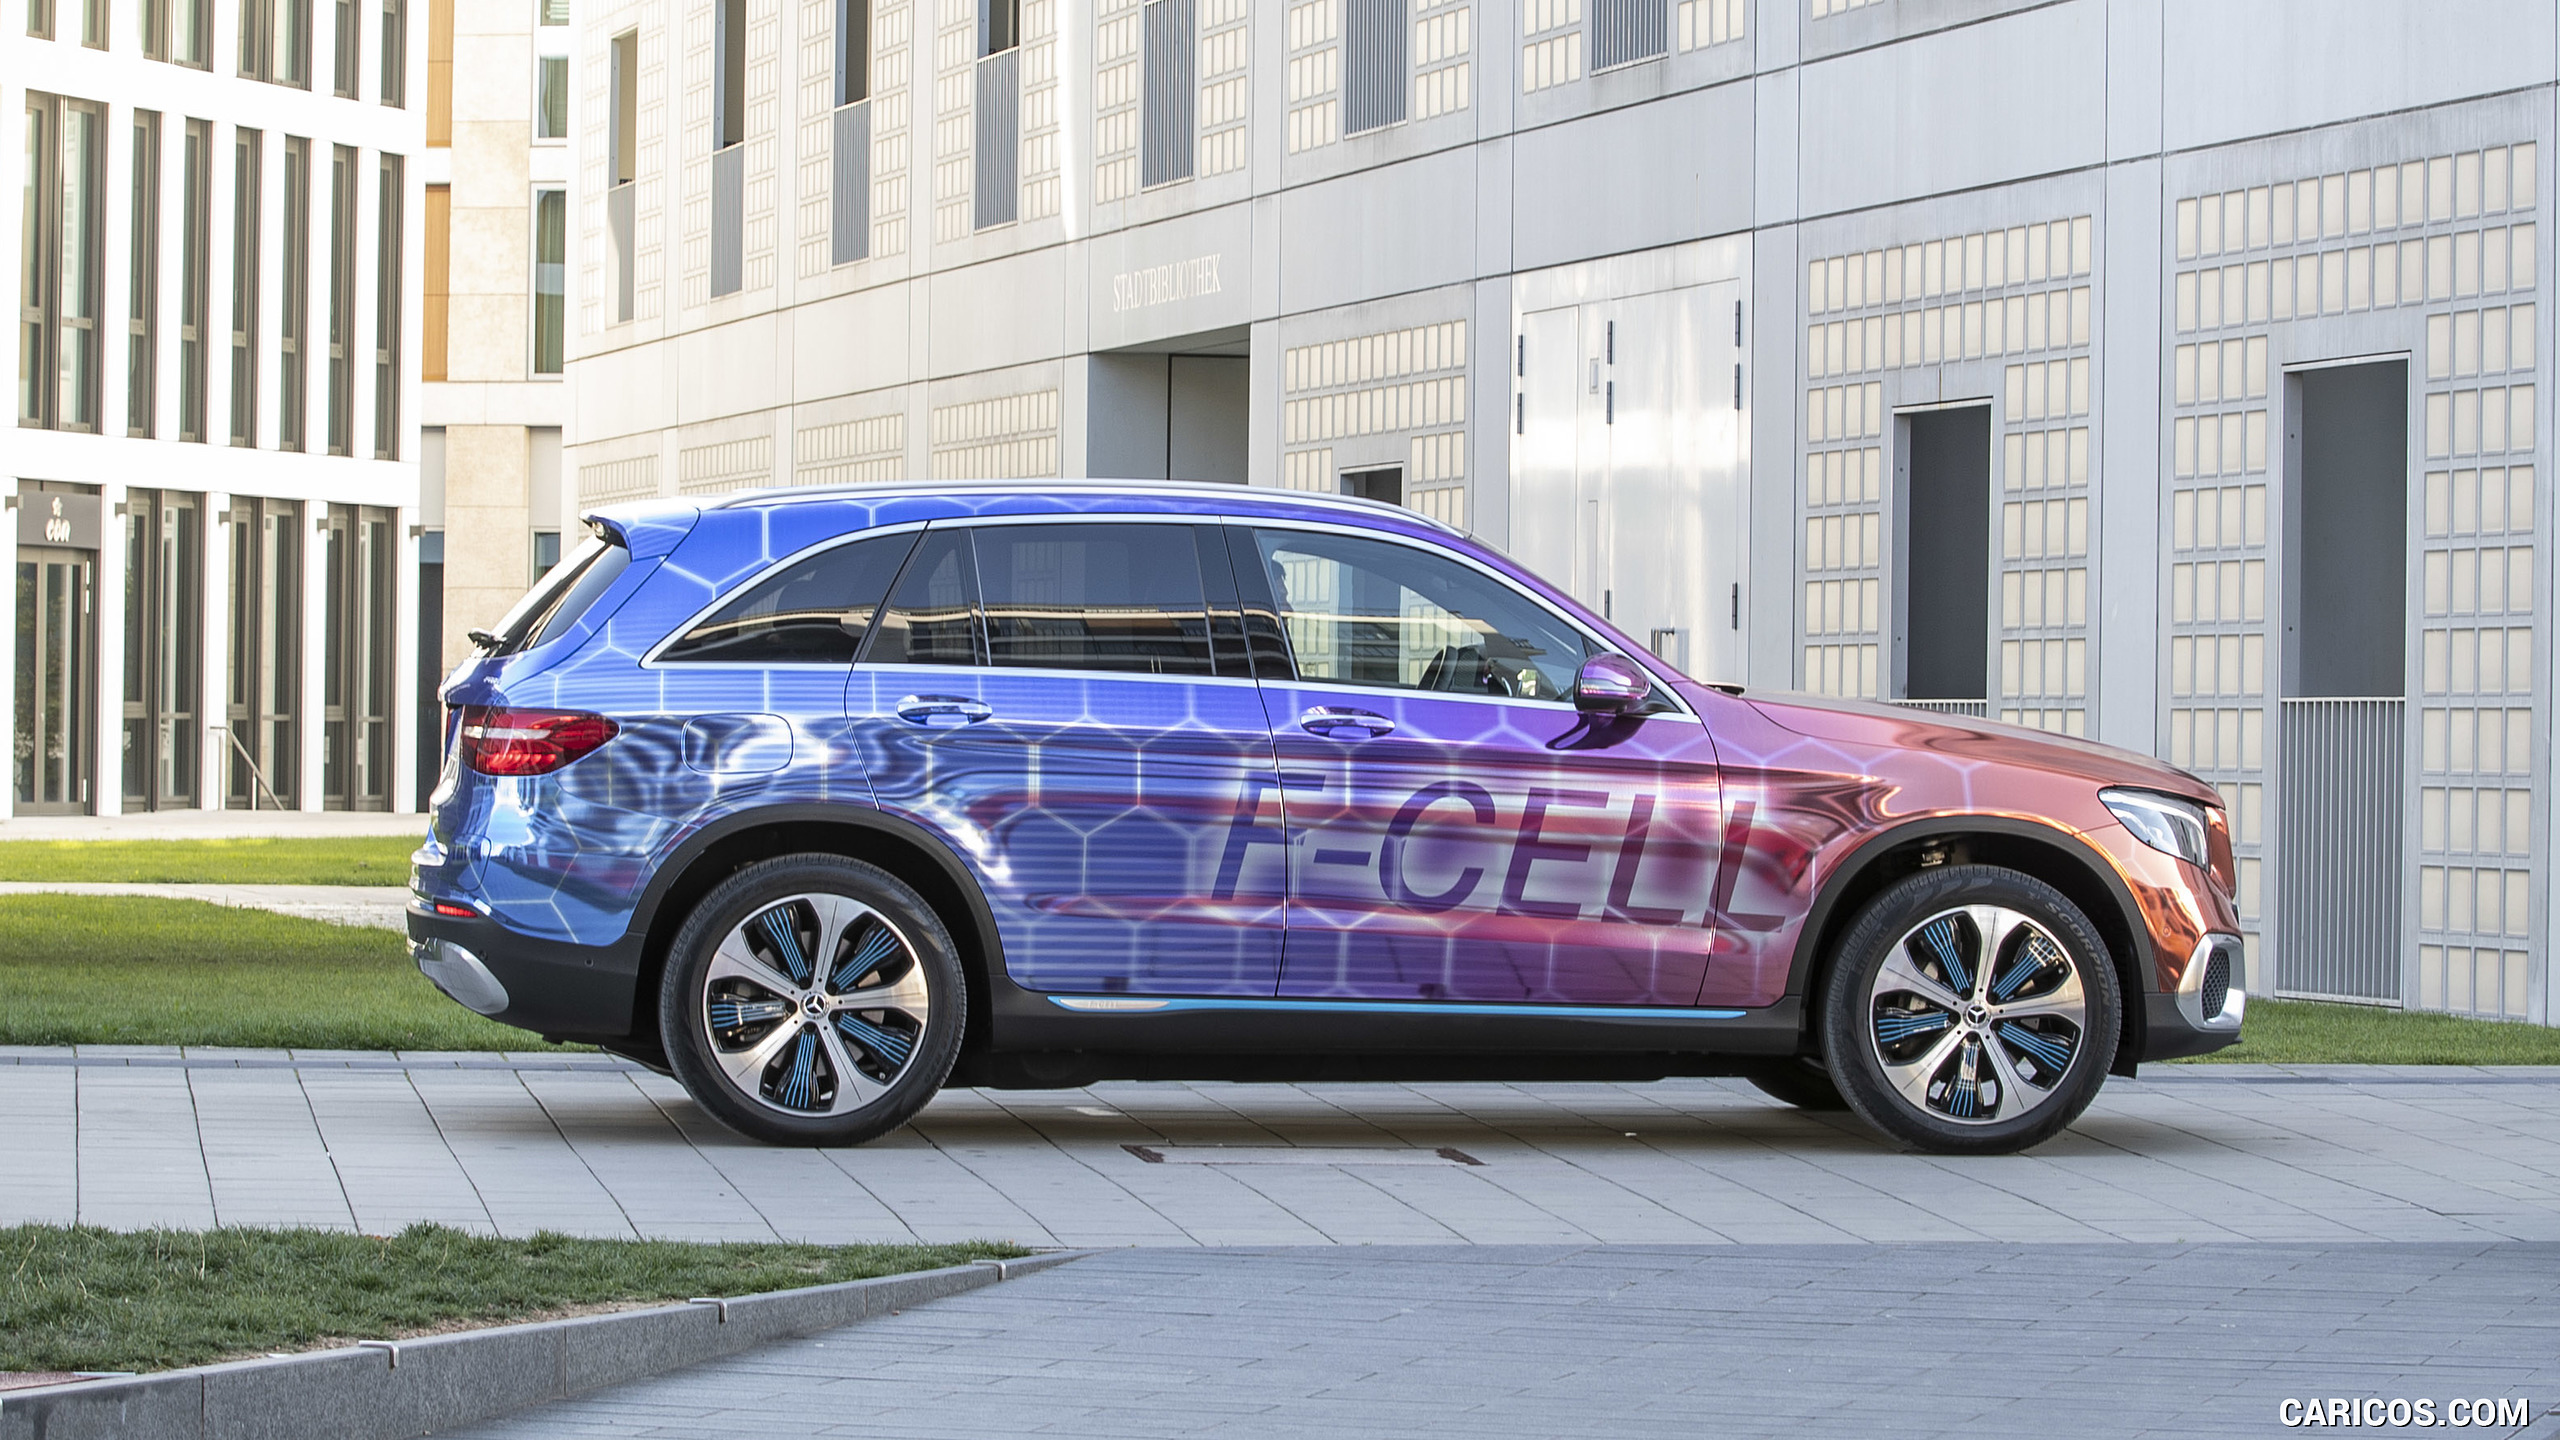 2019 Mercedes-Benz GLC F-CELL - Side, #73 of 95